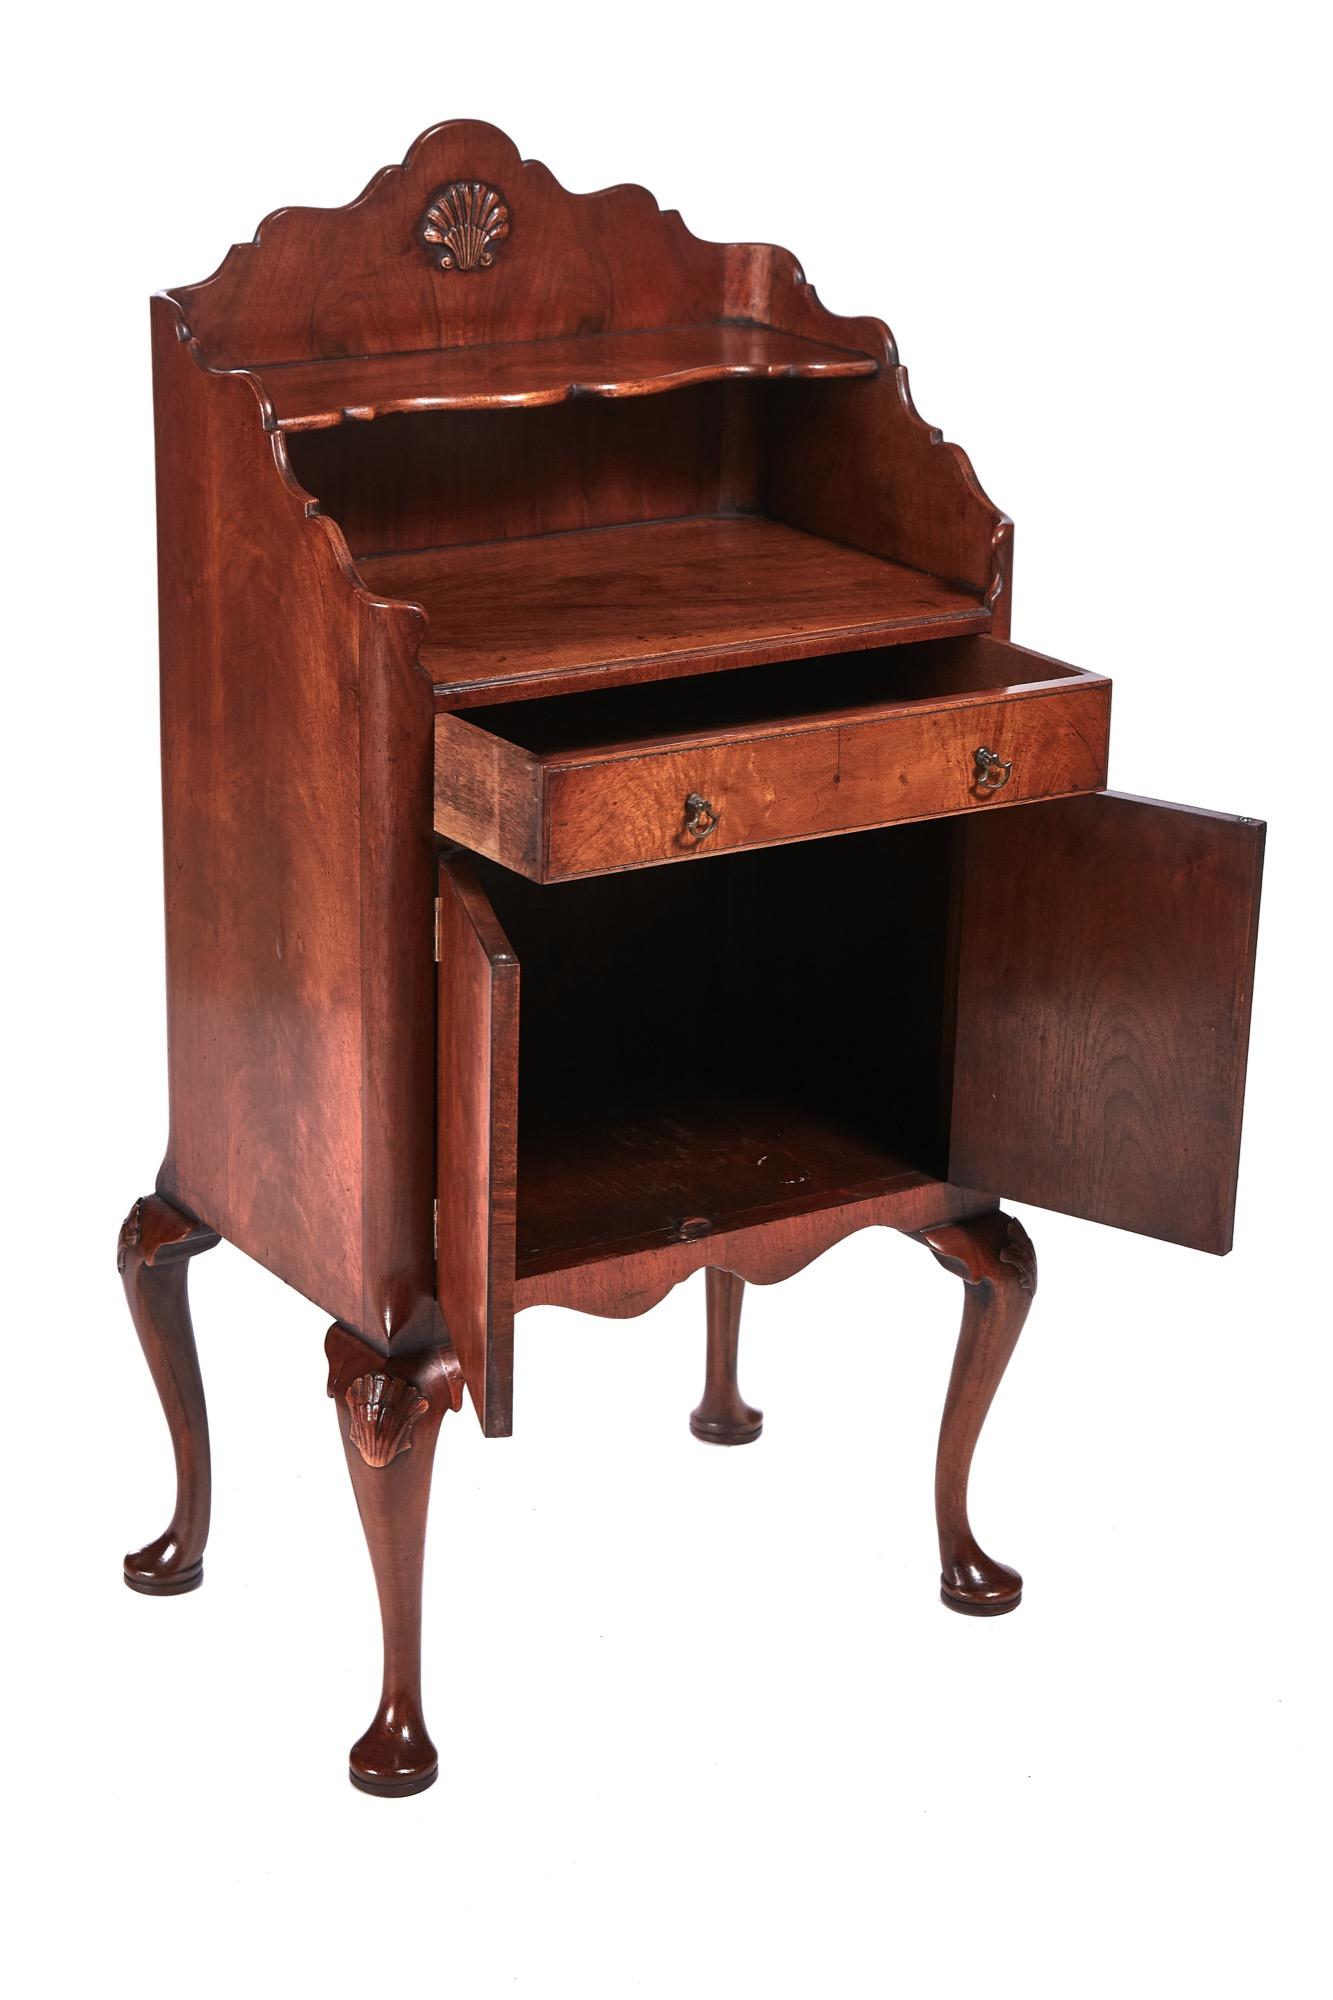 Quality burr walnut side cabinet having a lovely shaped back with carved shell, shaped shelf, one long drawer with original handles, 2 cupboard doors, shaped frieze standing on 4 shaped cabriole legs with pad feet and carved shells to the